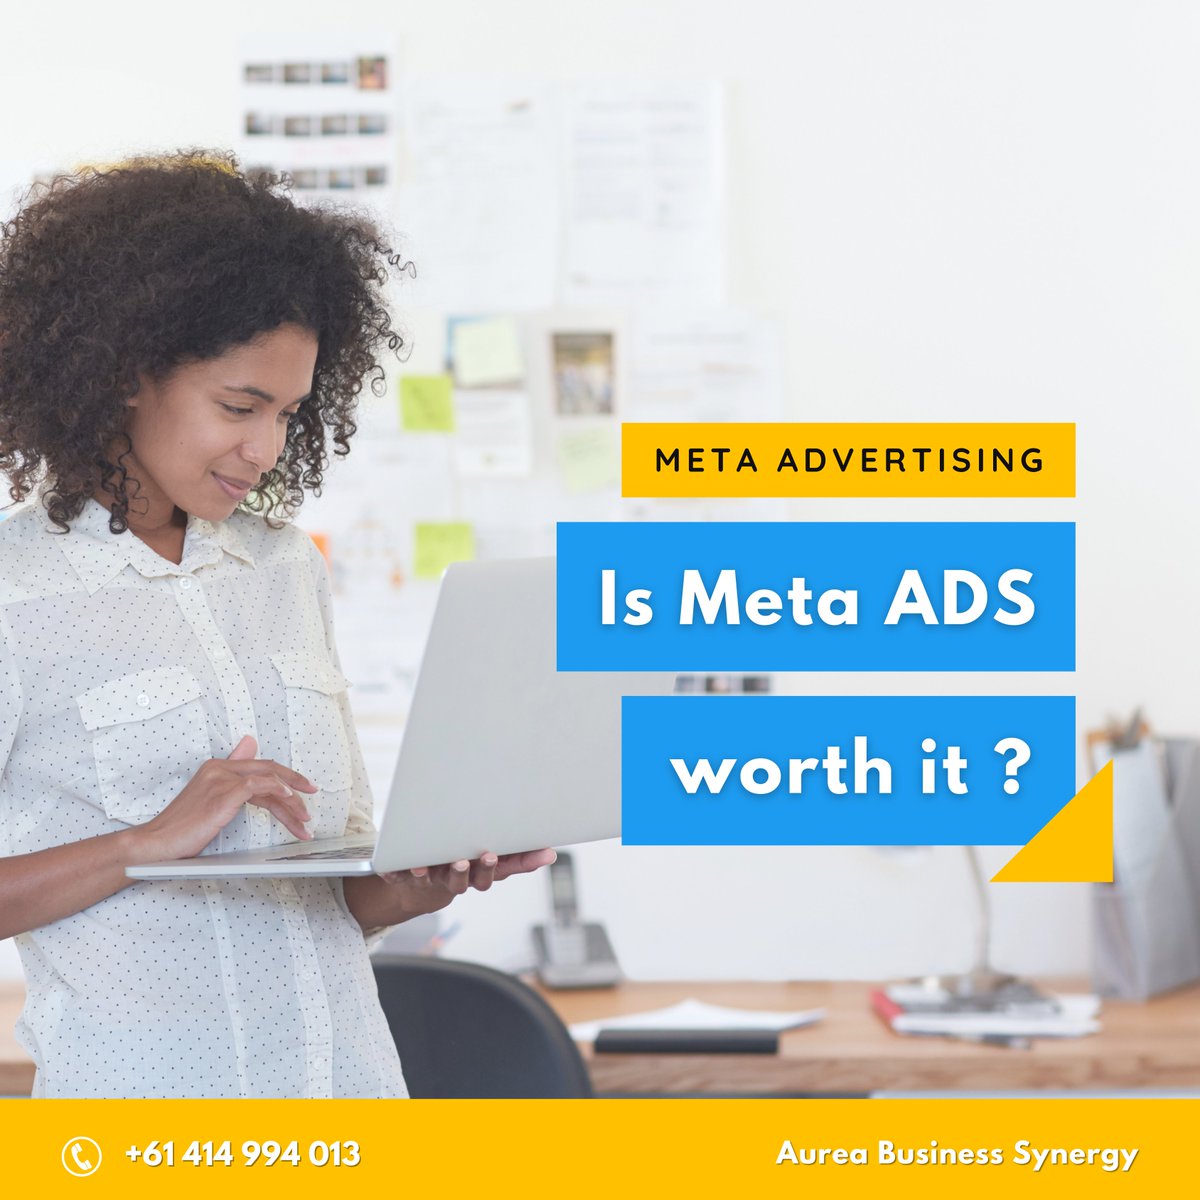 𝙄𝙨 𝙈𝙚𝙩𝙖 𝘼𝙙𝙨 𝙬𝙤𝙧𝙩𝙝 𝙞𝙩?

Meta-ads offer  flexible budgeting options to fit your business needs. Large or small budget, you can reach your target audience!

#SocialMediaTips #BusinessSupport #BudgetFriendlyAds #SocialMediaManagement #AureaBusinessSynergy